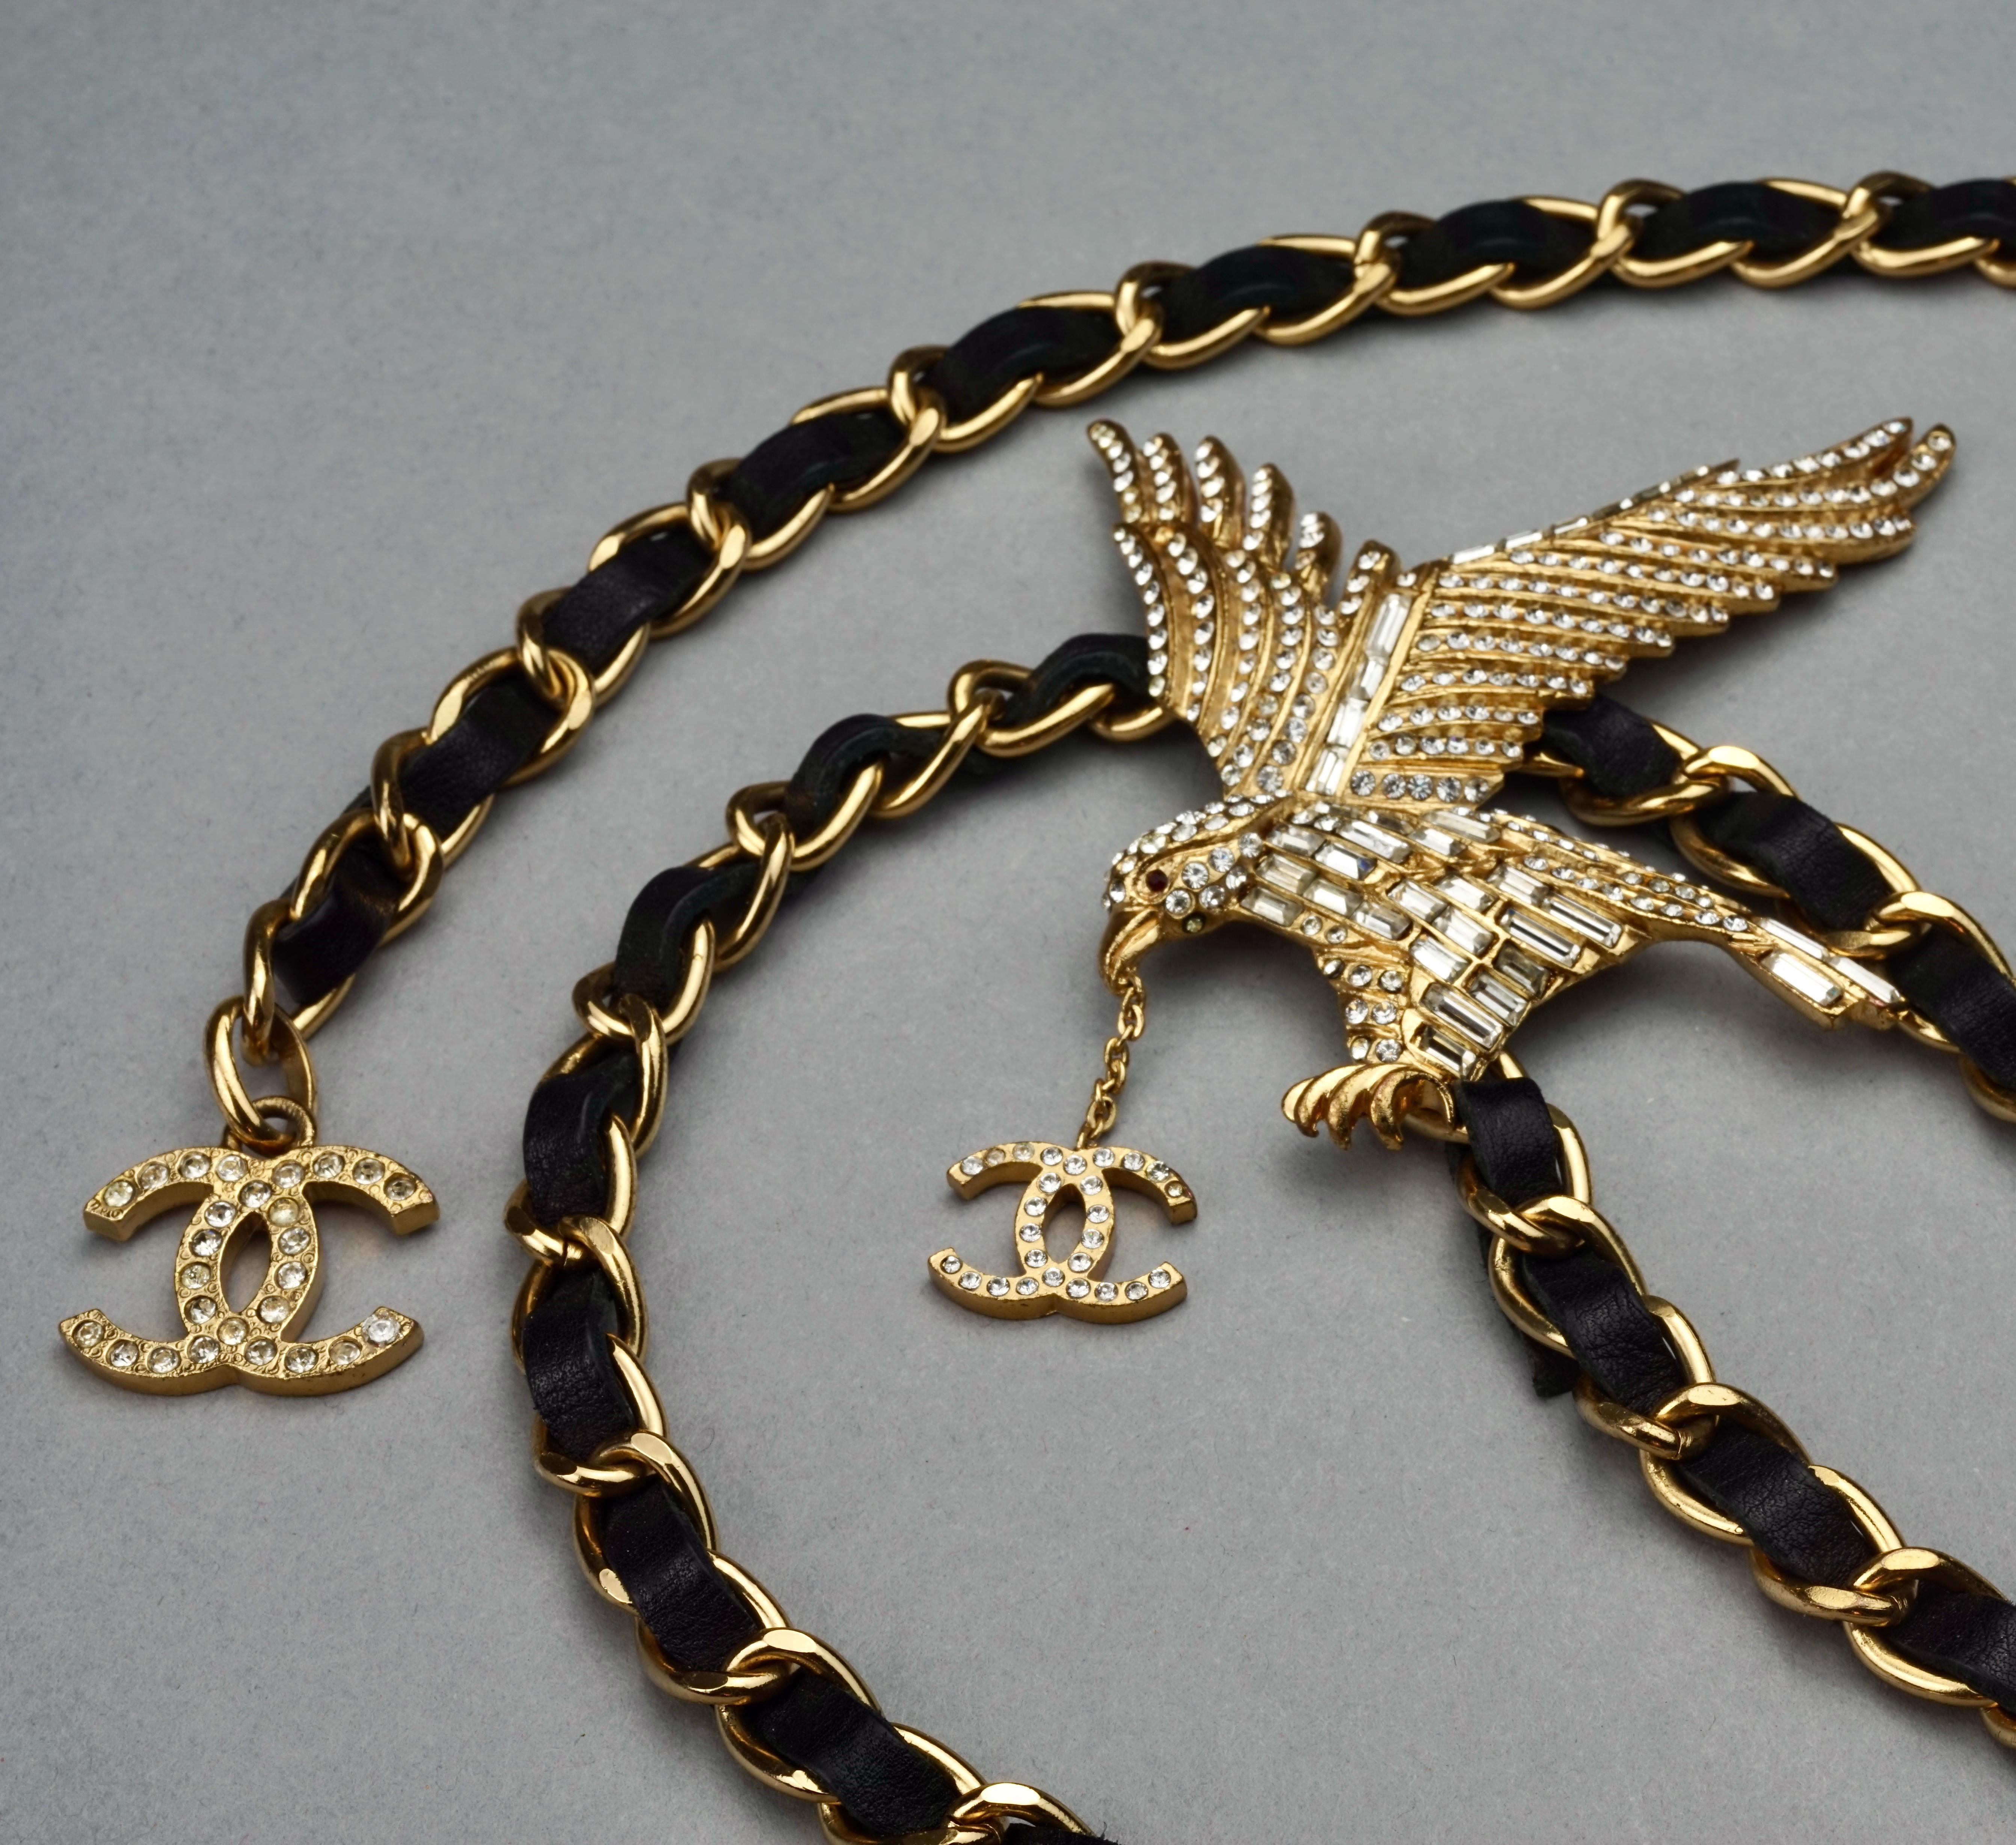 Vintage CHANEL Jeweled Eagle Chain Leather Necklace Belt 1